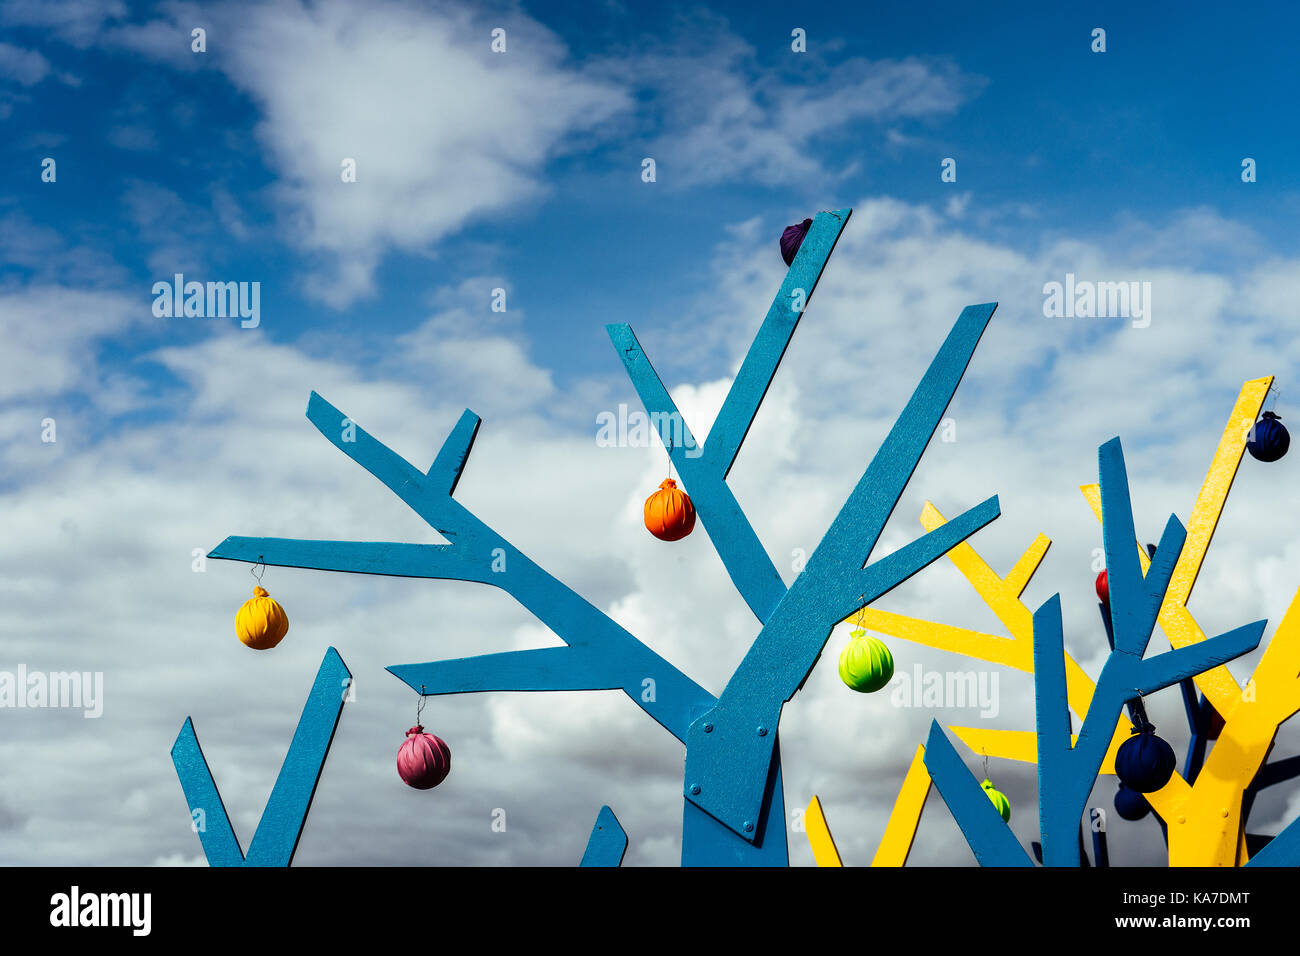 Abstract tree shapes against a blue sky with clouds horizontal Stock Photo